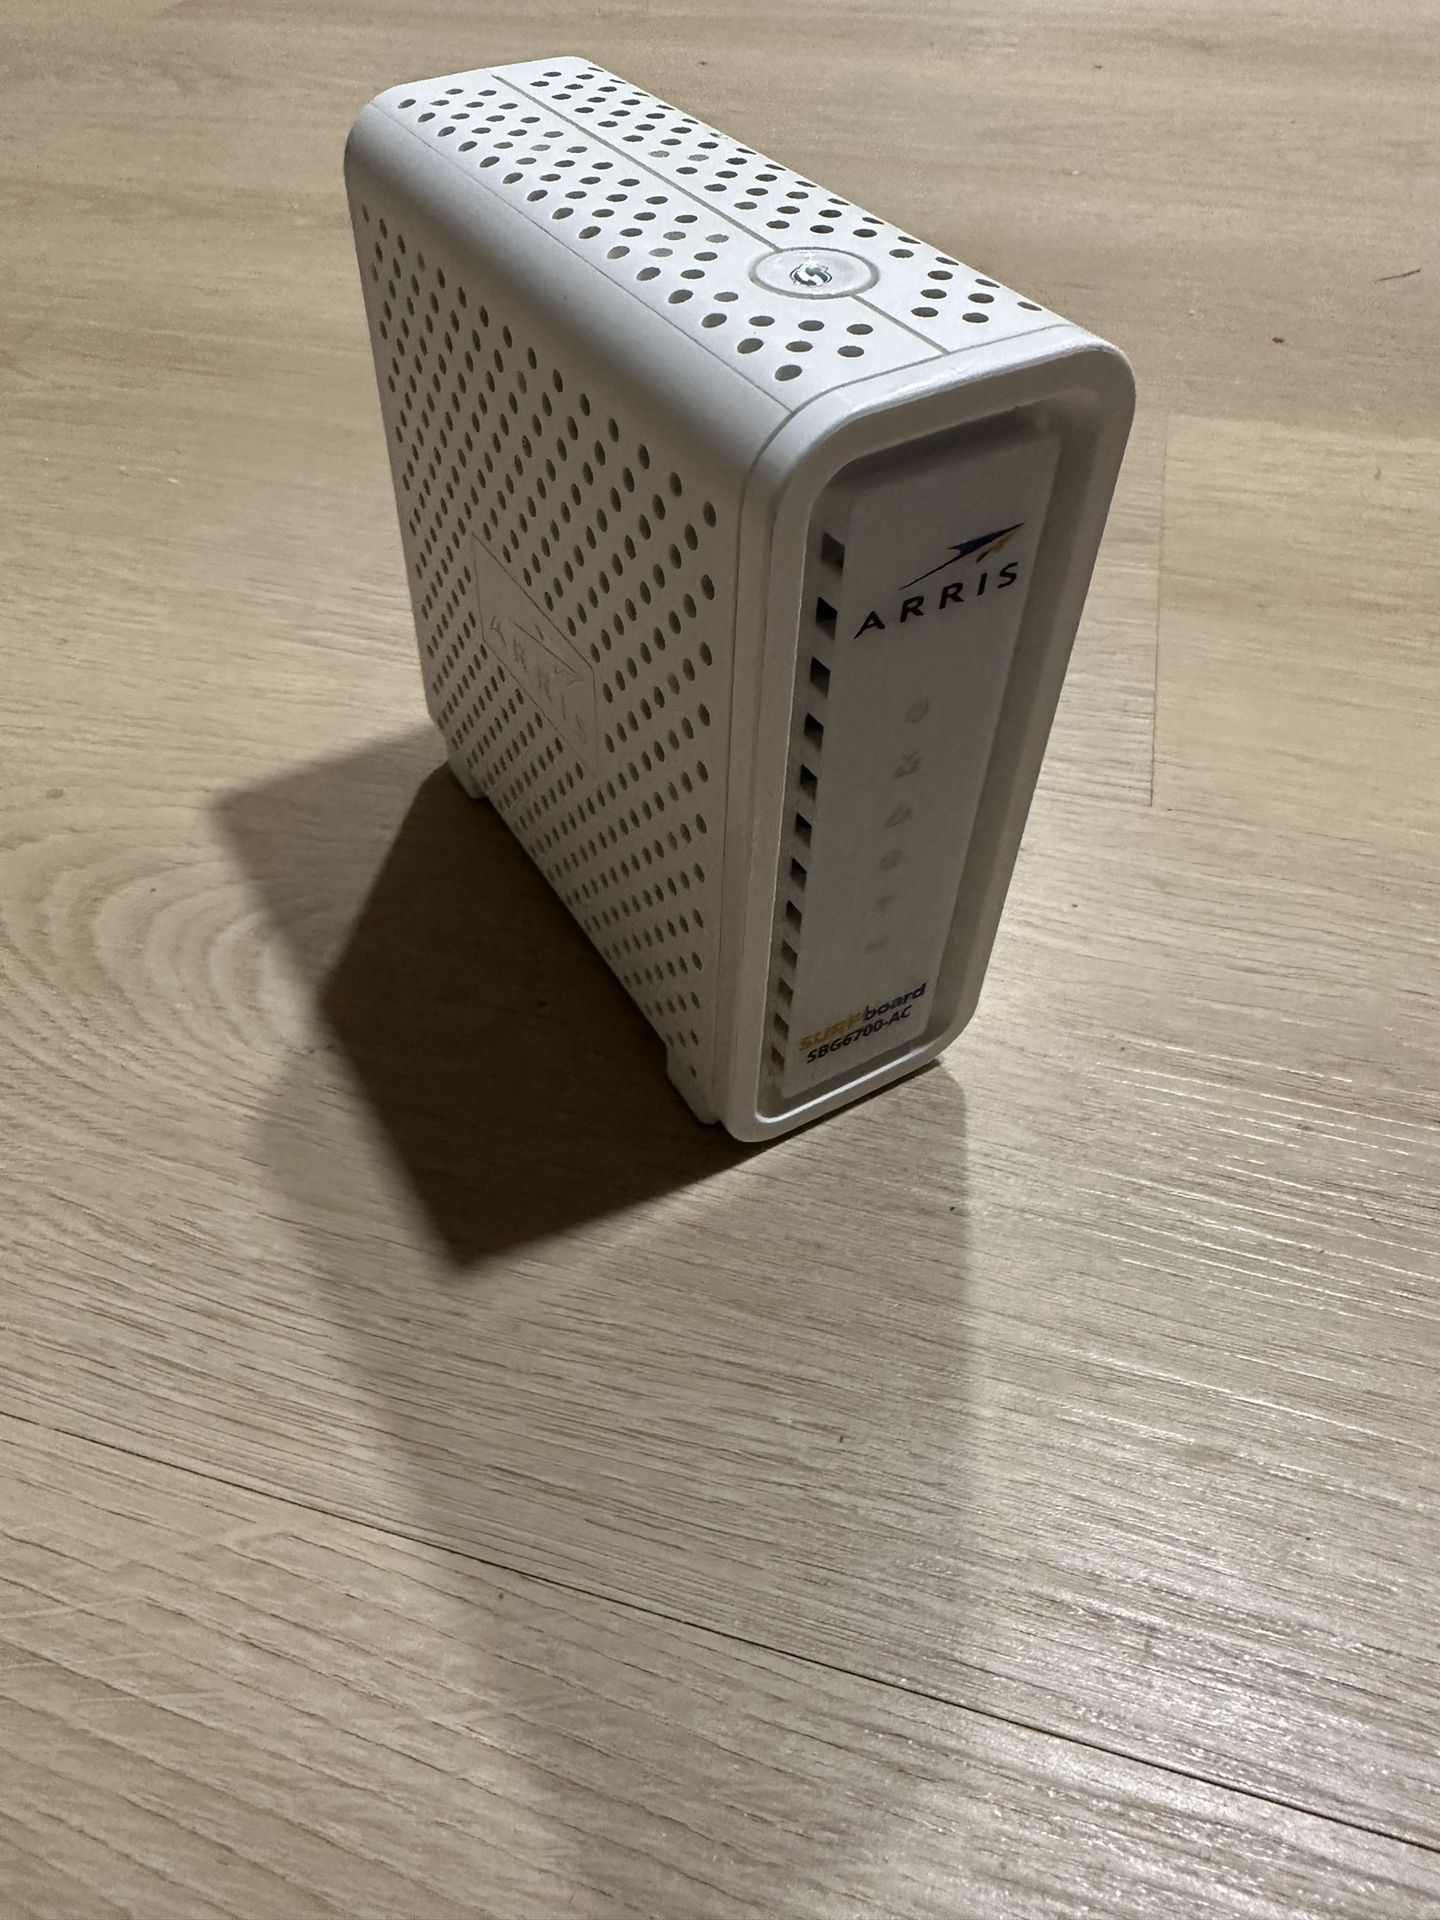 Arris Surfboard SBG 6700-AC Modem And Router Combo